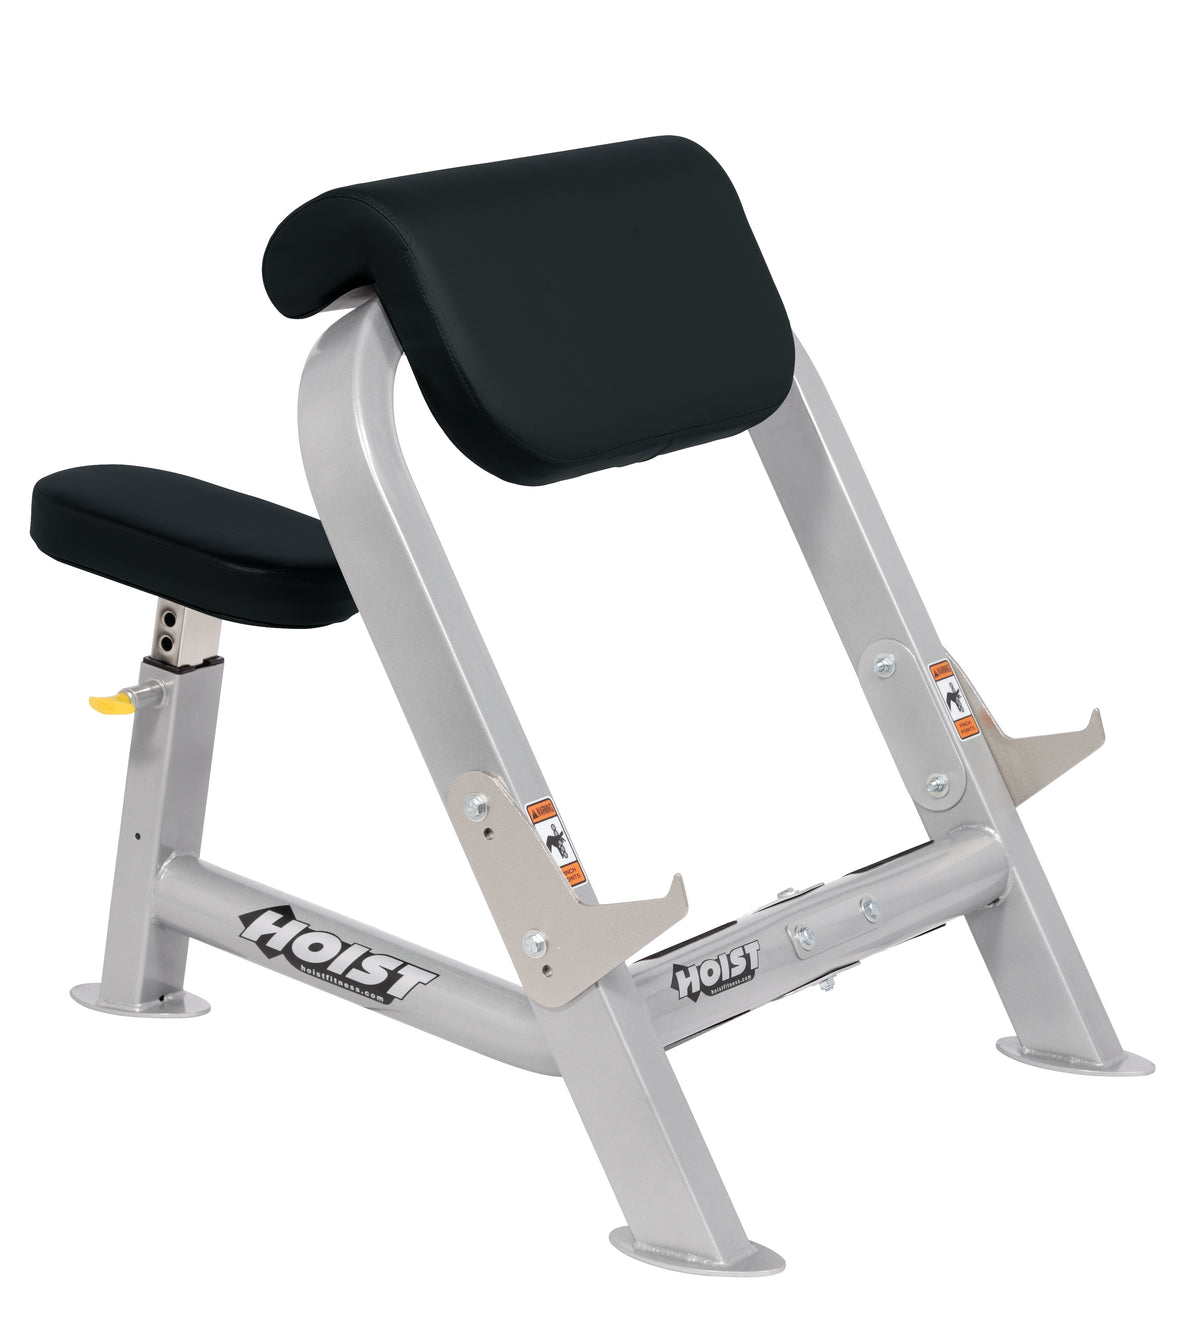 Hoist Fitness HF-4550 Preacher Curl Bench full view | Fitness Experience